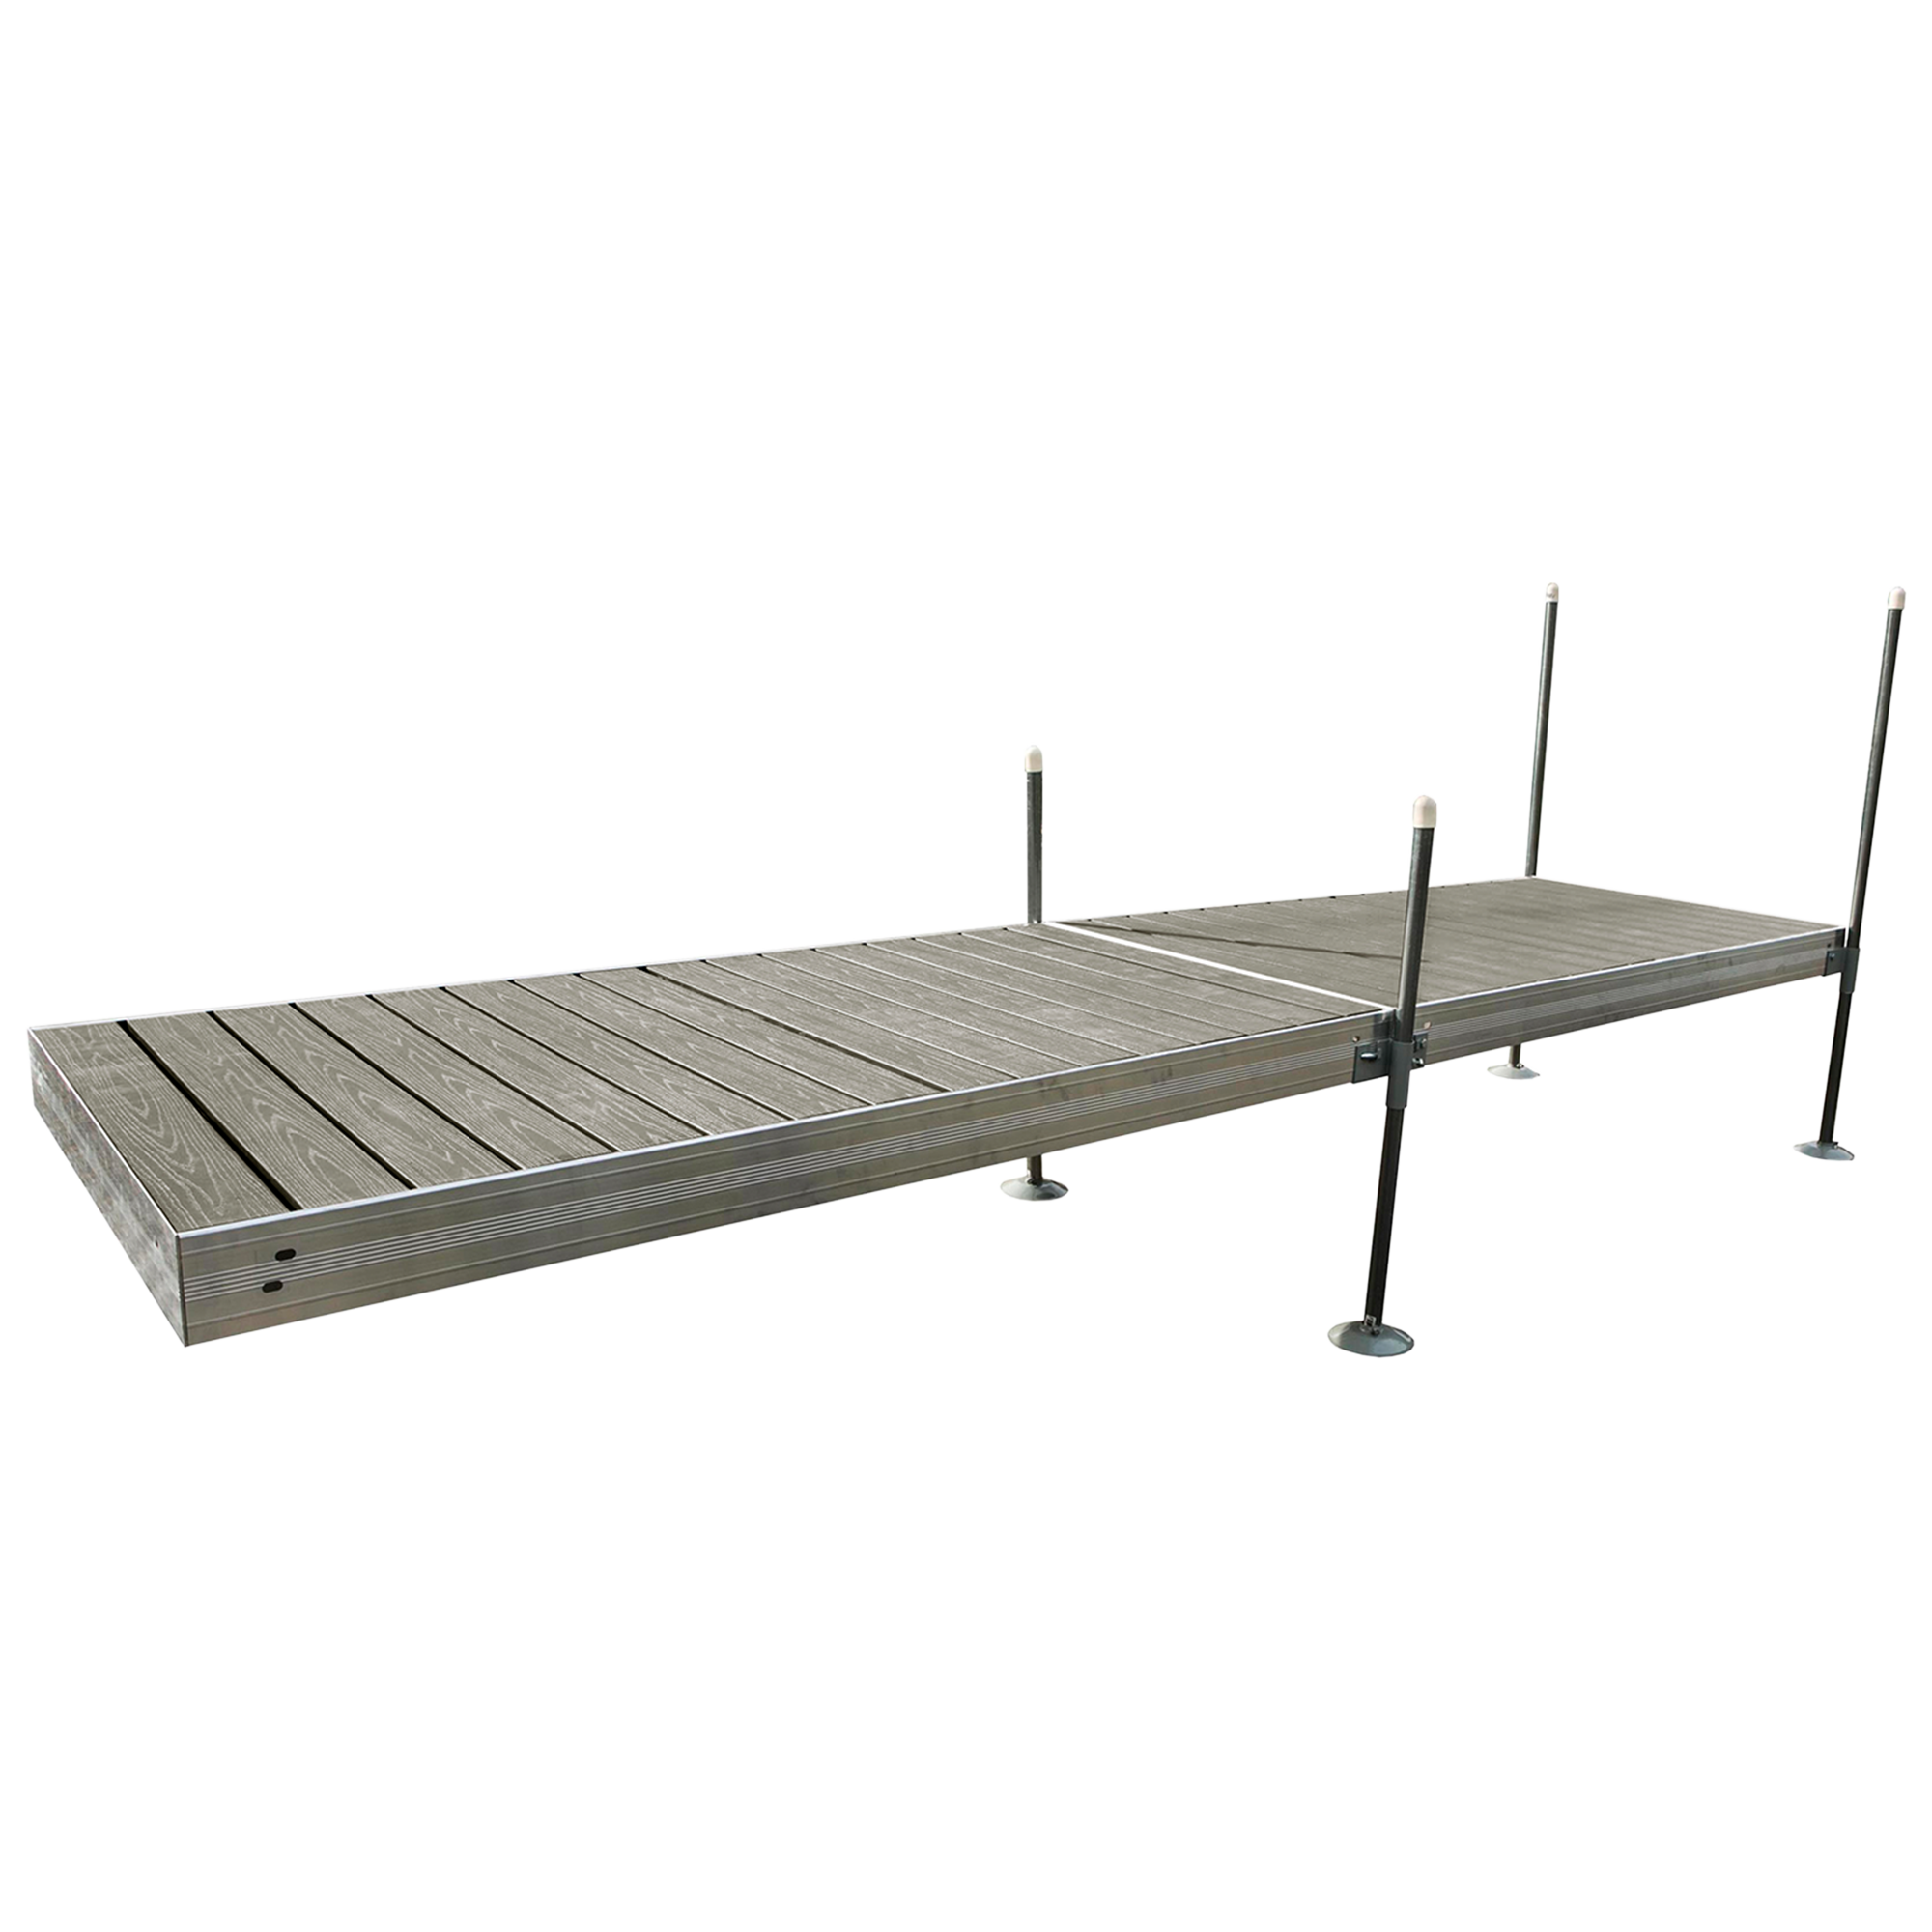 16' Straight Boat Dock System with Aluminum Frame and Gray Composite Decking